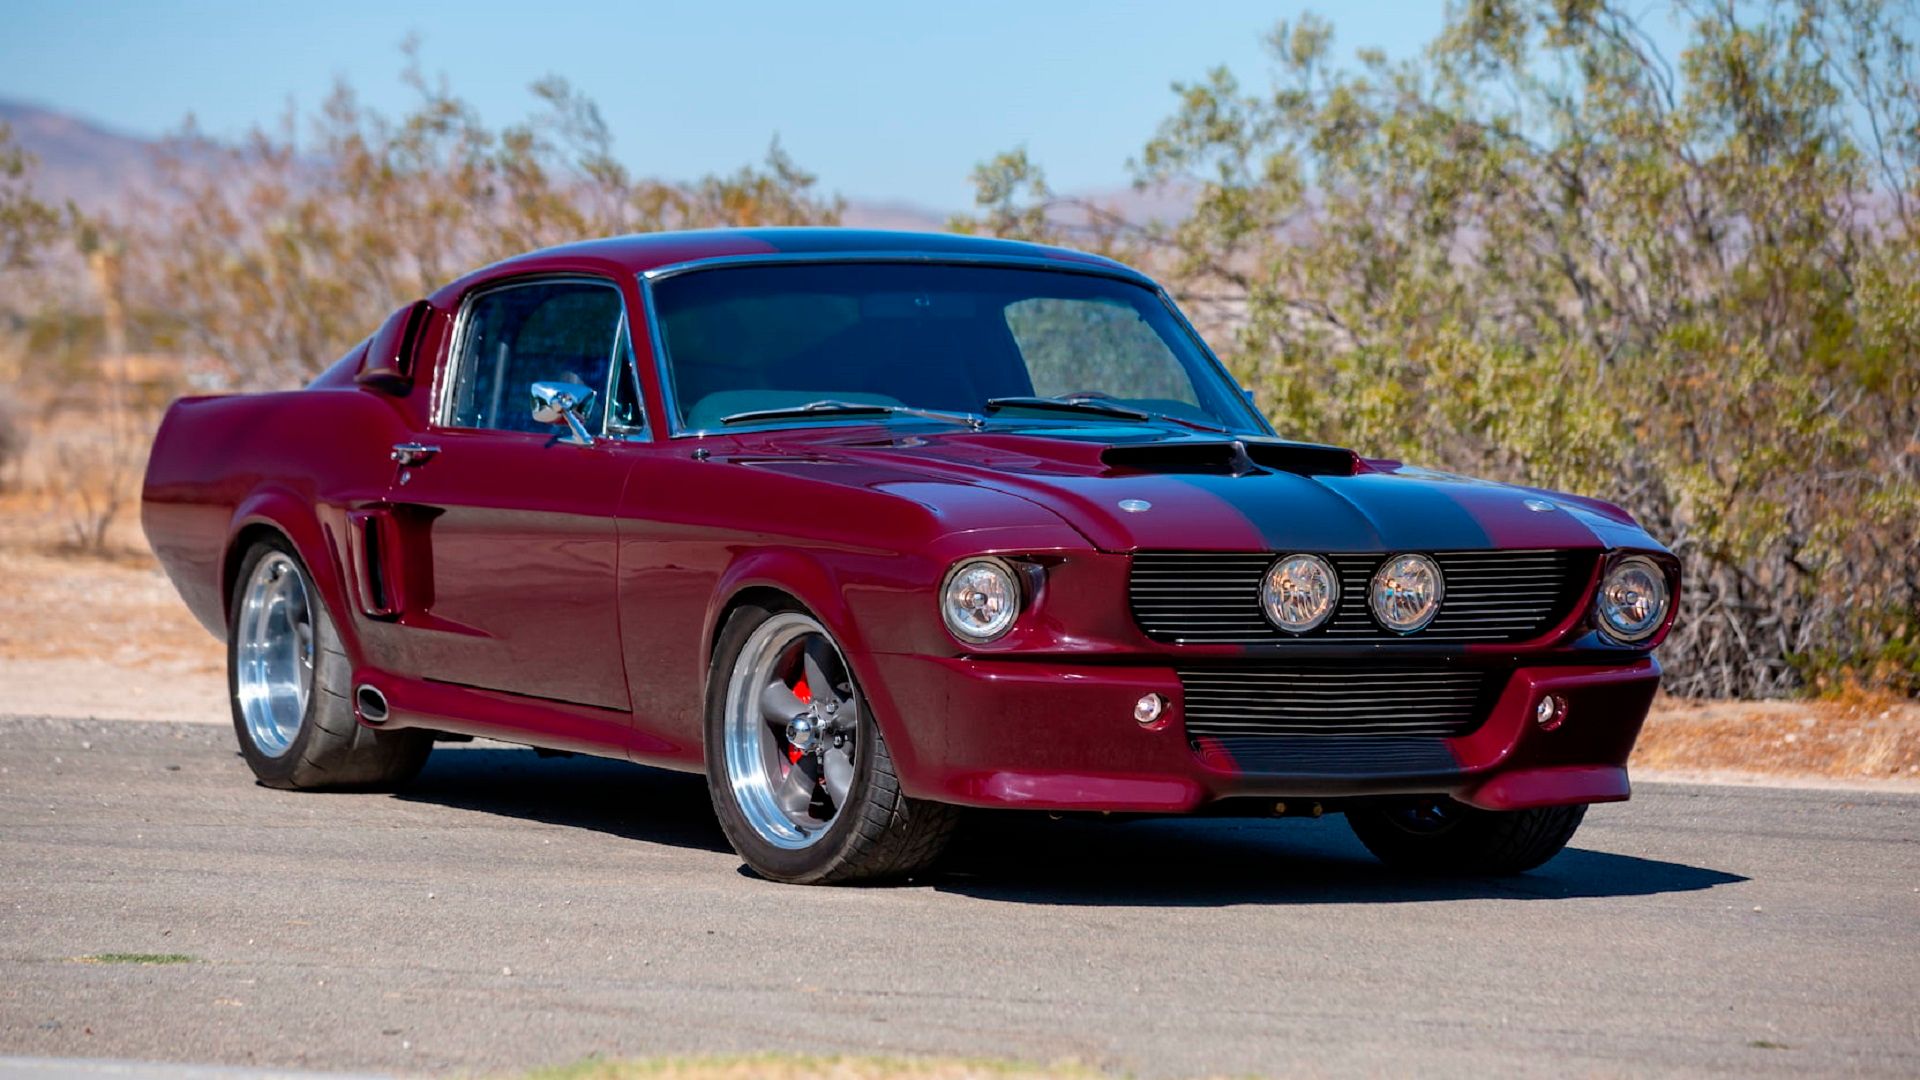 15 Reasons Why The 1967 Ford Mustang Fastback Is Considered Iconic